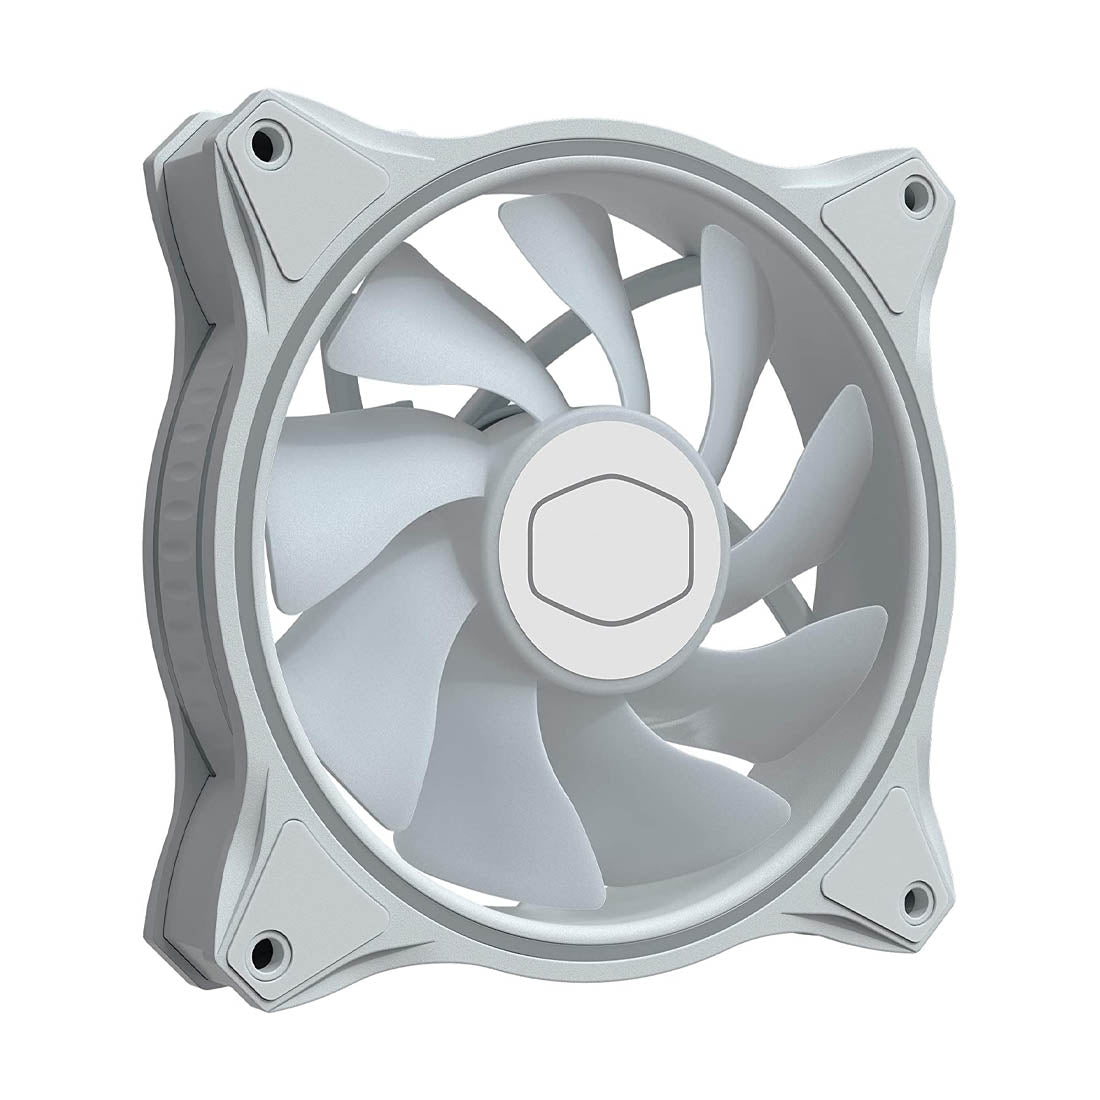 [RePacked] Cooler Master MasterFan MF120 Halo White Edition ARGB CPU Case Fan with Dual Loop Lighting